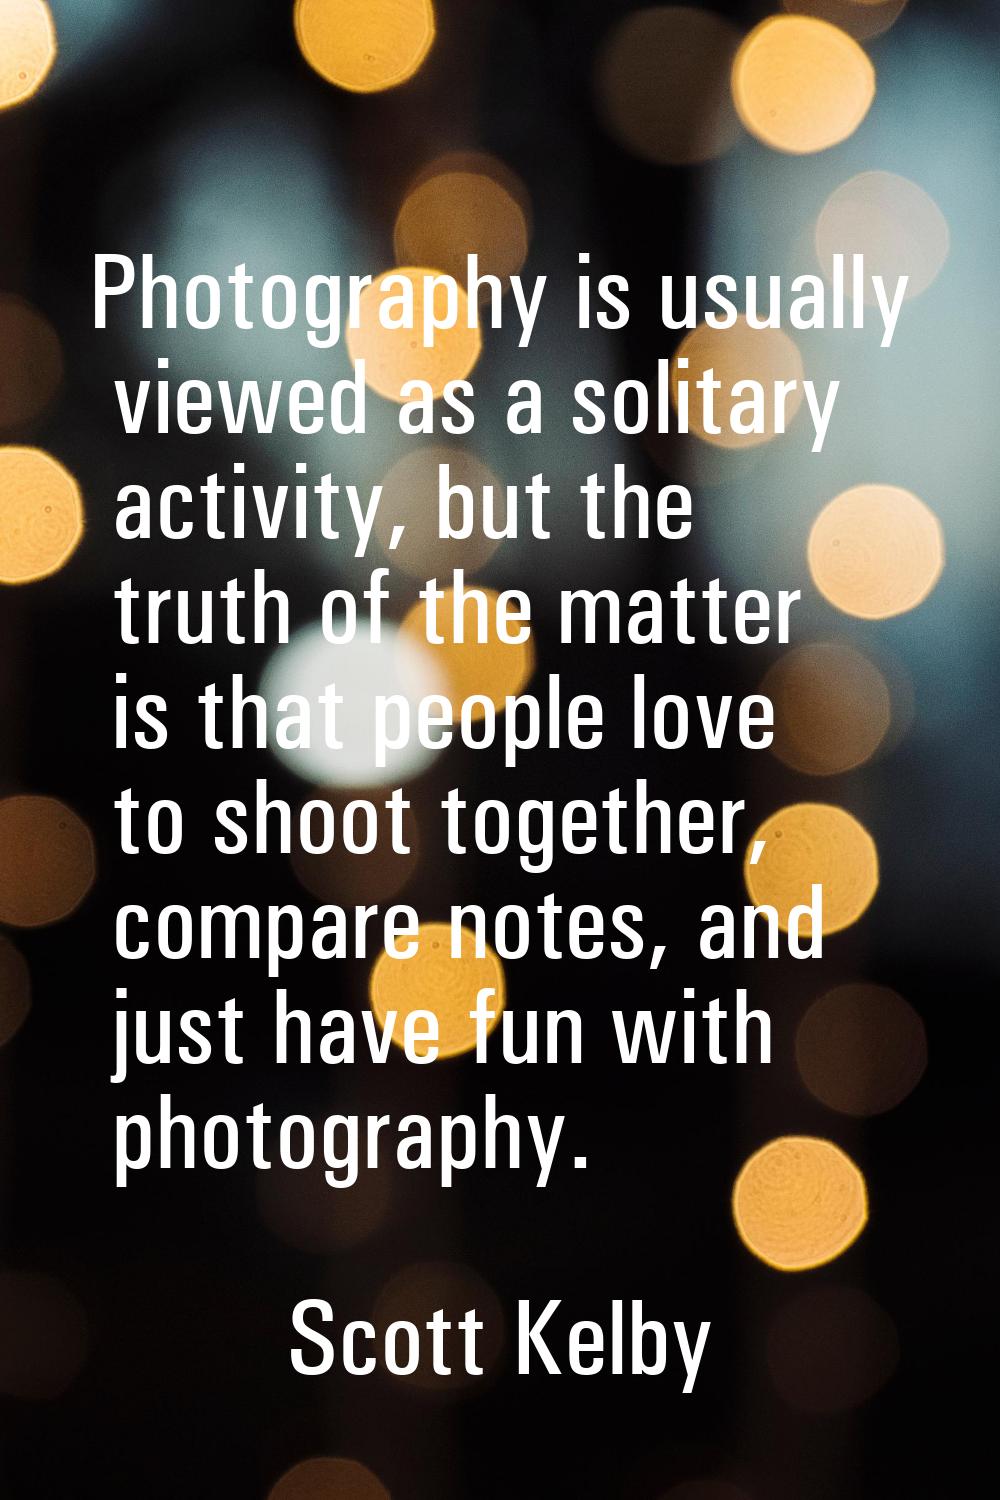 Photography is usually viewed as a solitary activity, but the truth of the matter is that people lo